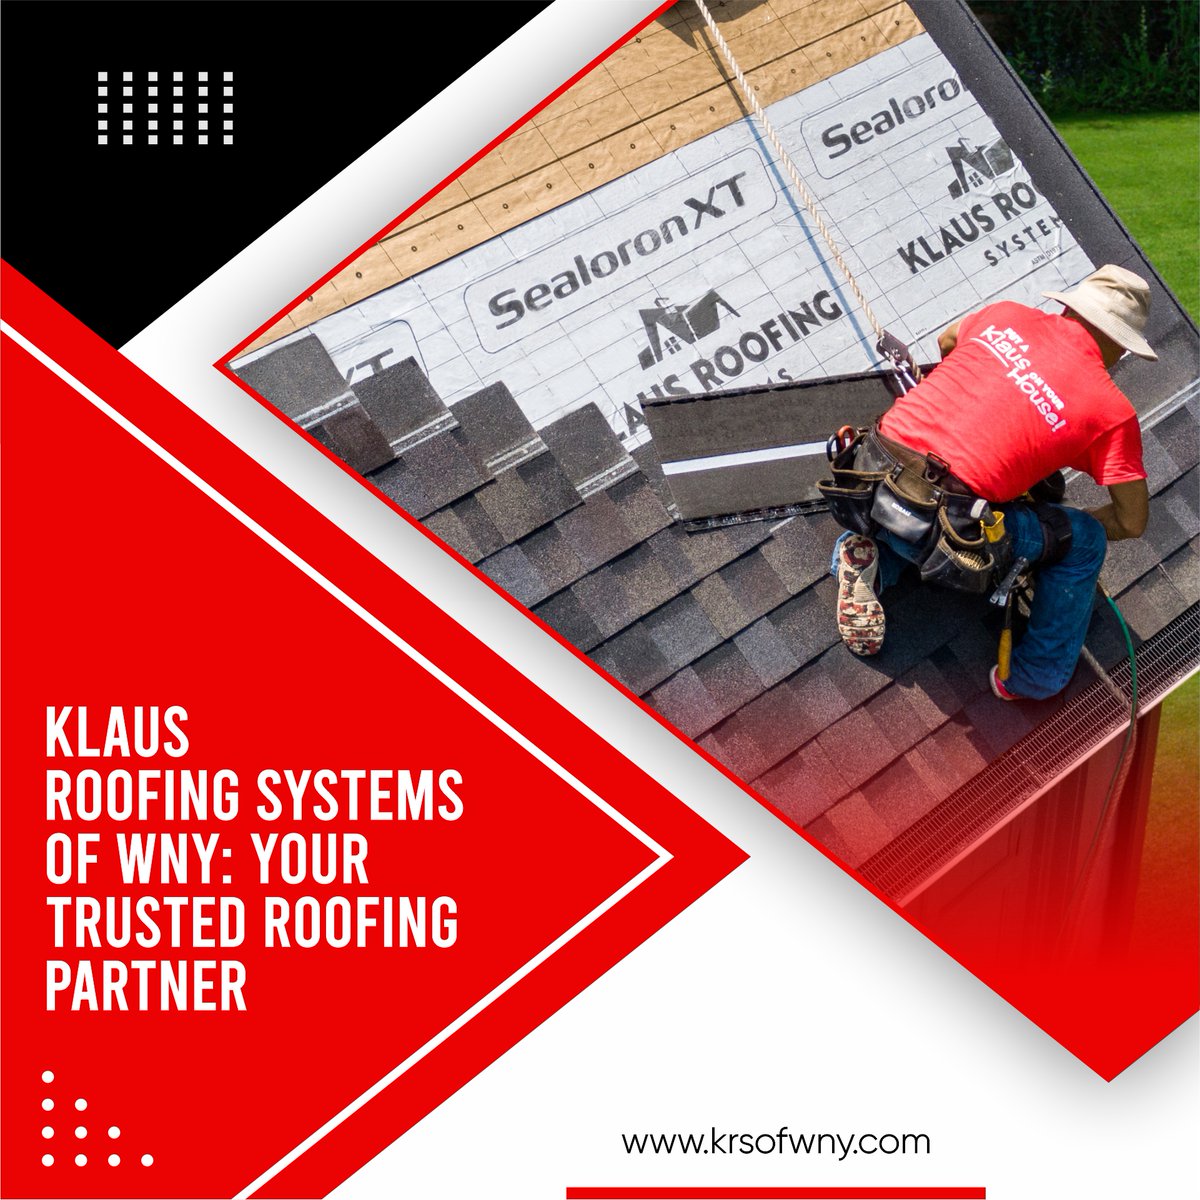 Building trust, one roof at a time! Klaus Roofing Systems of WNY is your reliable partner in roofing solutions. From repairs to installations, our dedicated team ensures your peace of mind.
--
🌐 krsofwny.com

#trustworthyroofing
#roofingsolutions
#reliableroofers